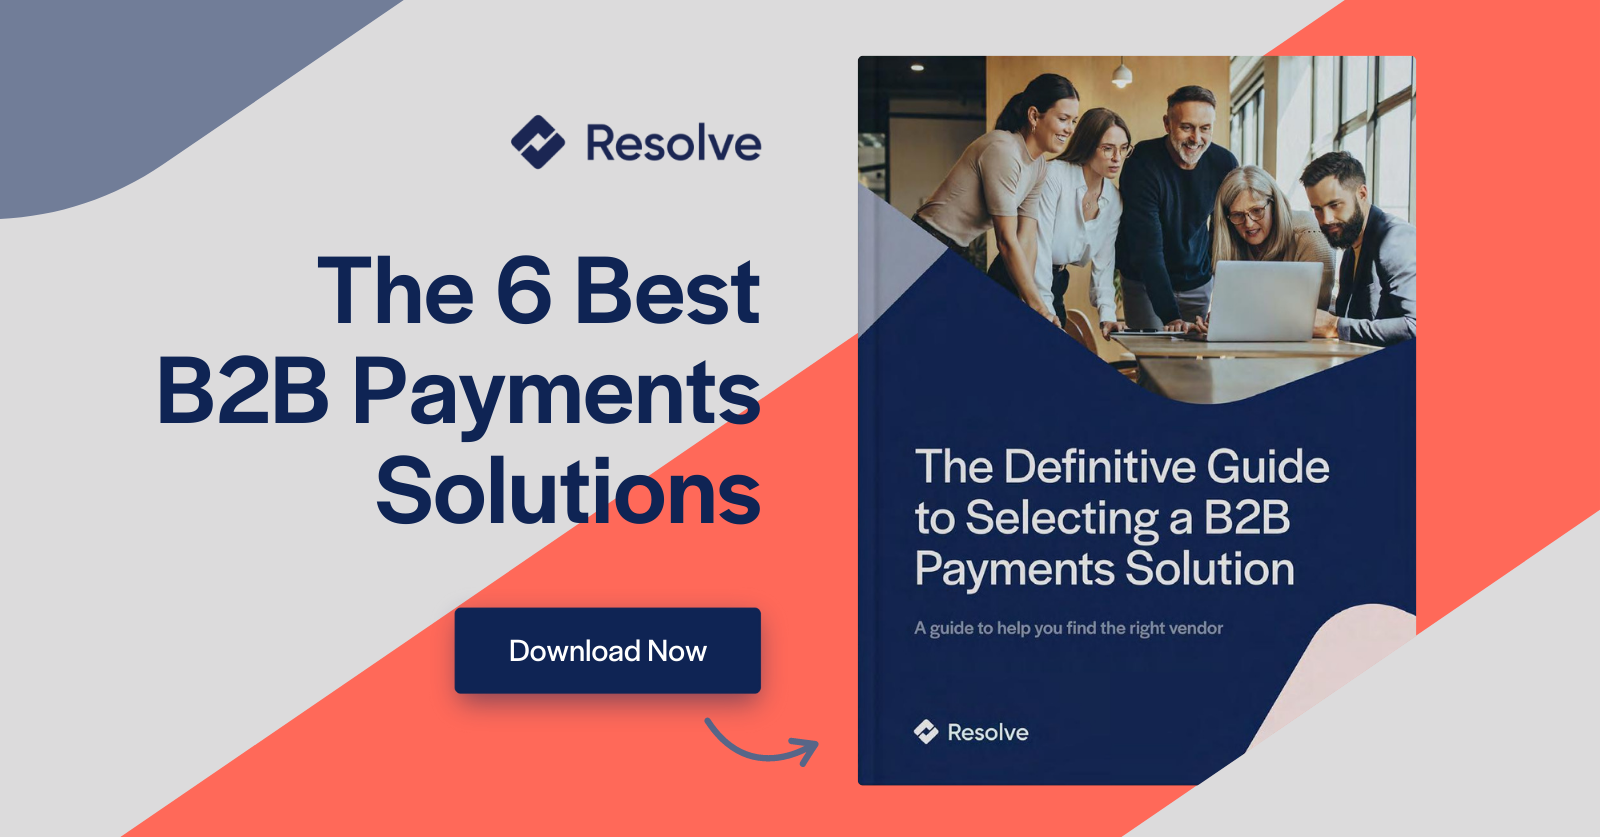 The 6 Best B2B Payments Solutions